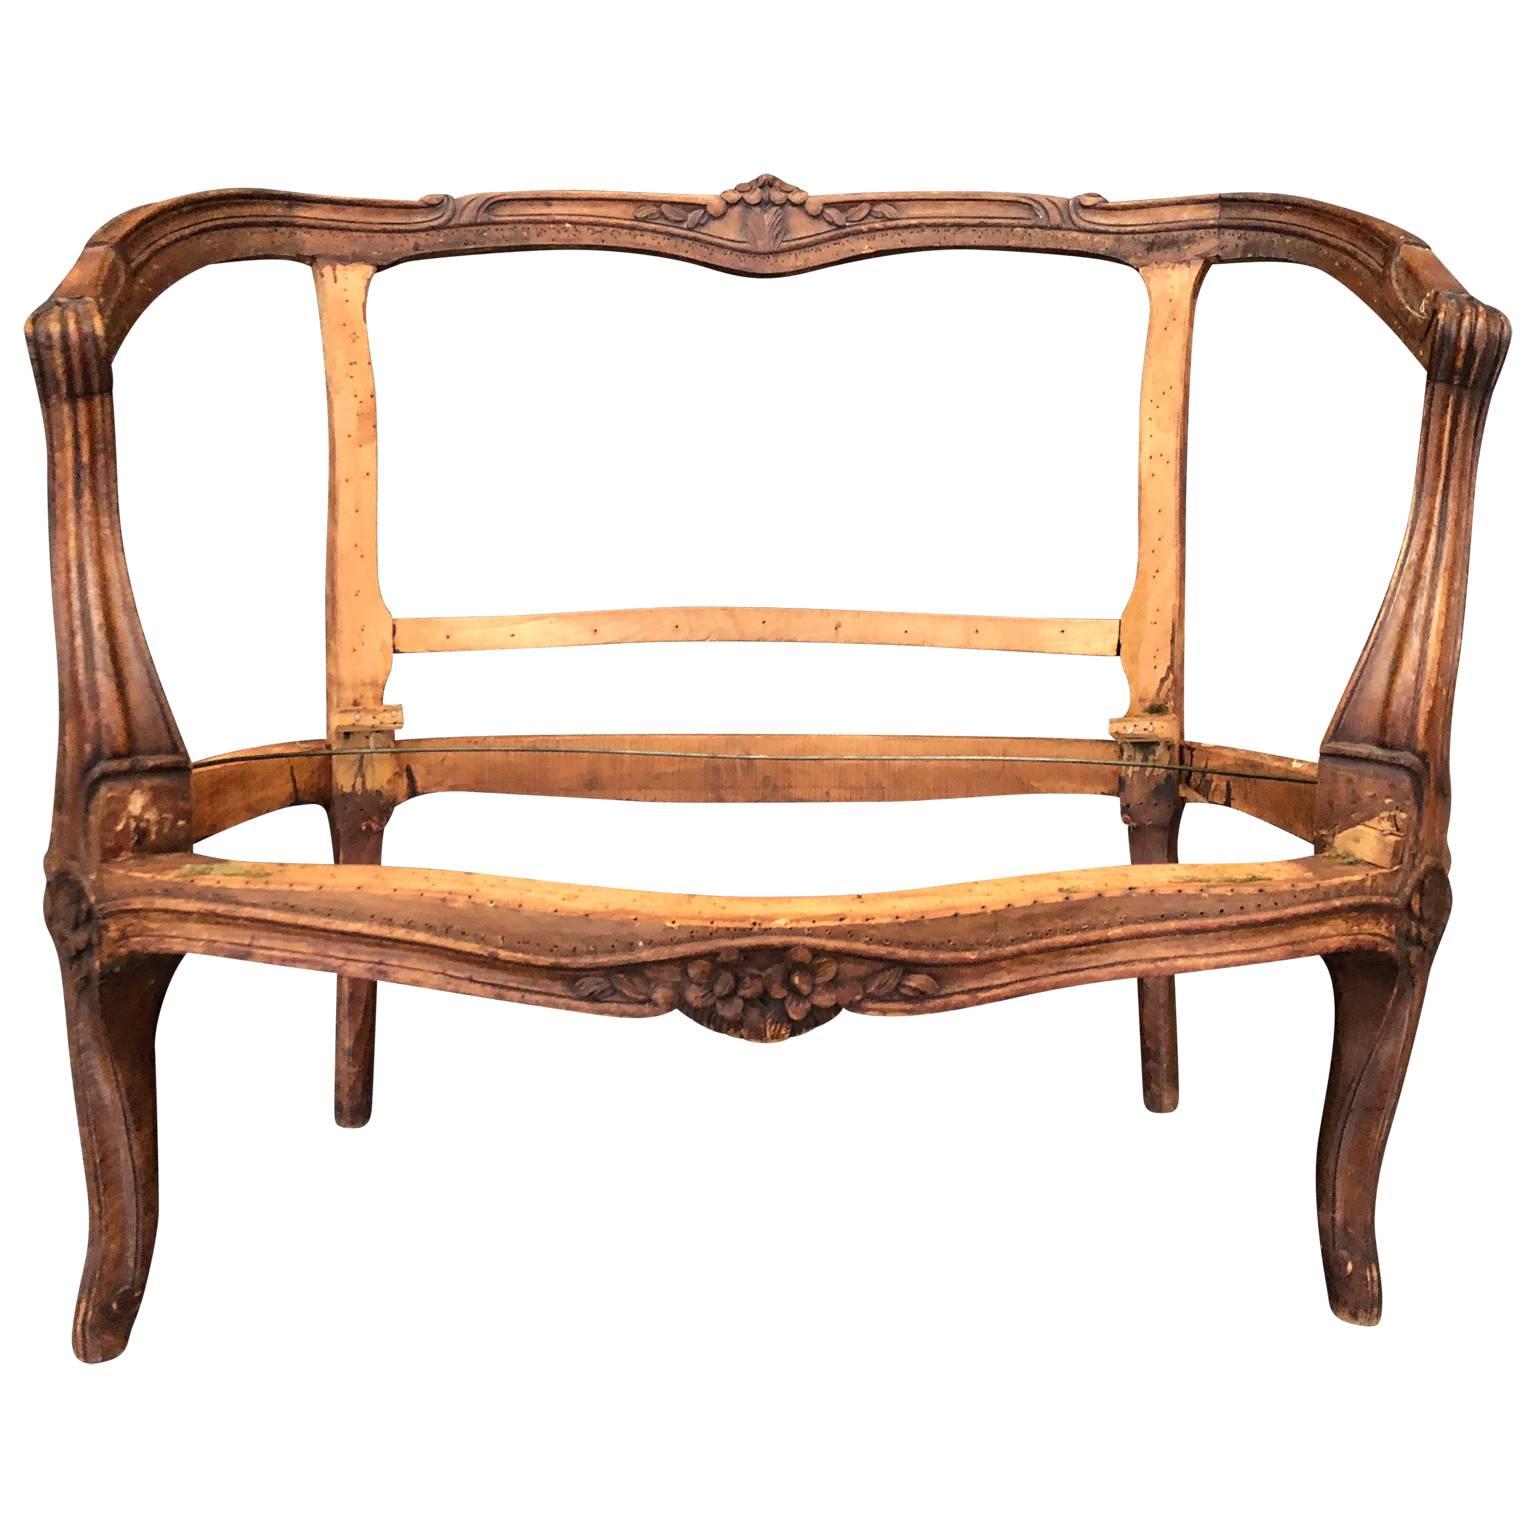 French Rococo two-seat settee armchair frame.
 